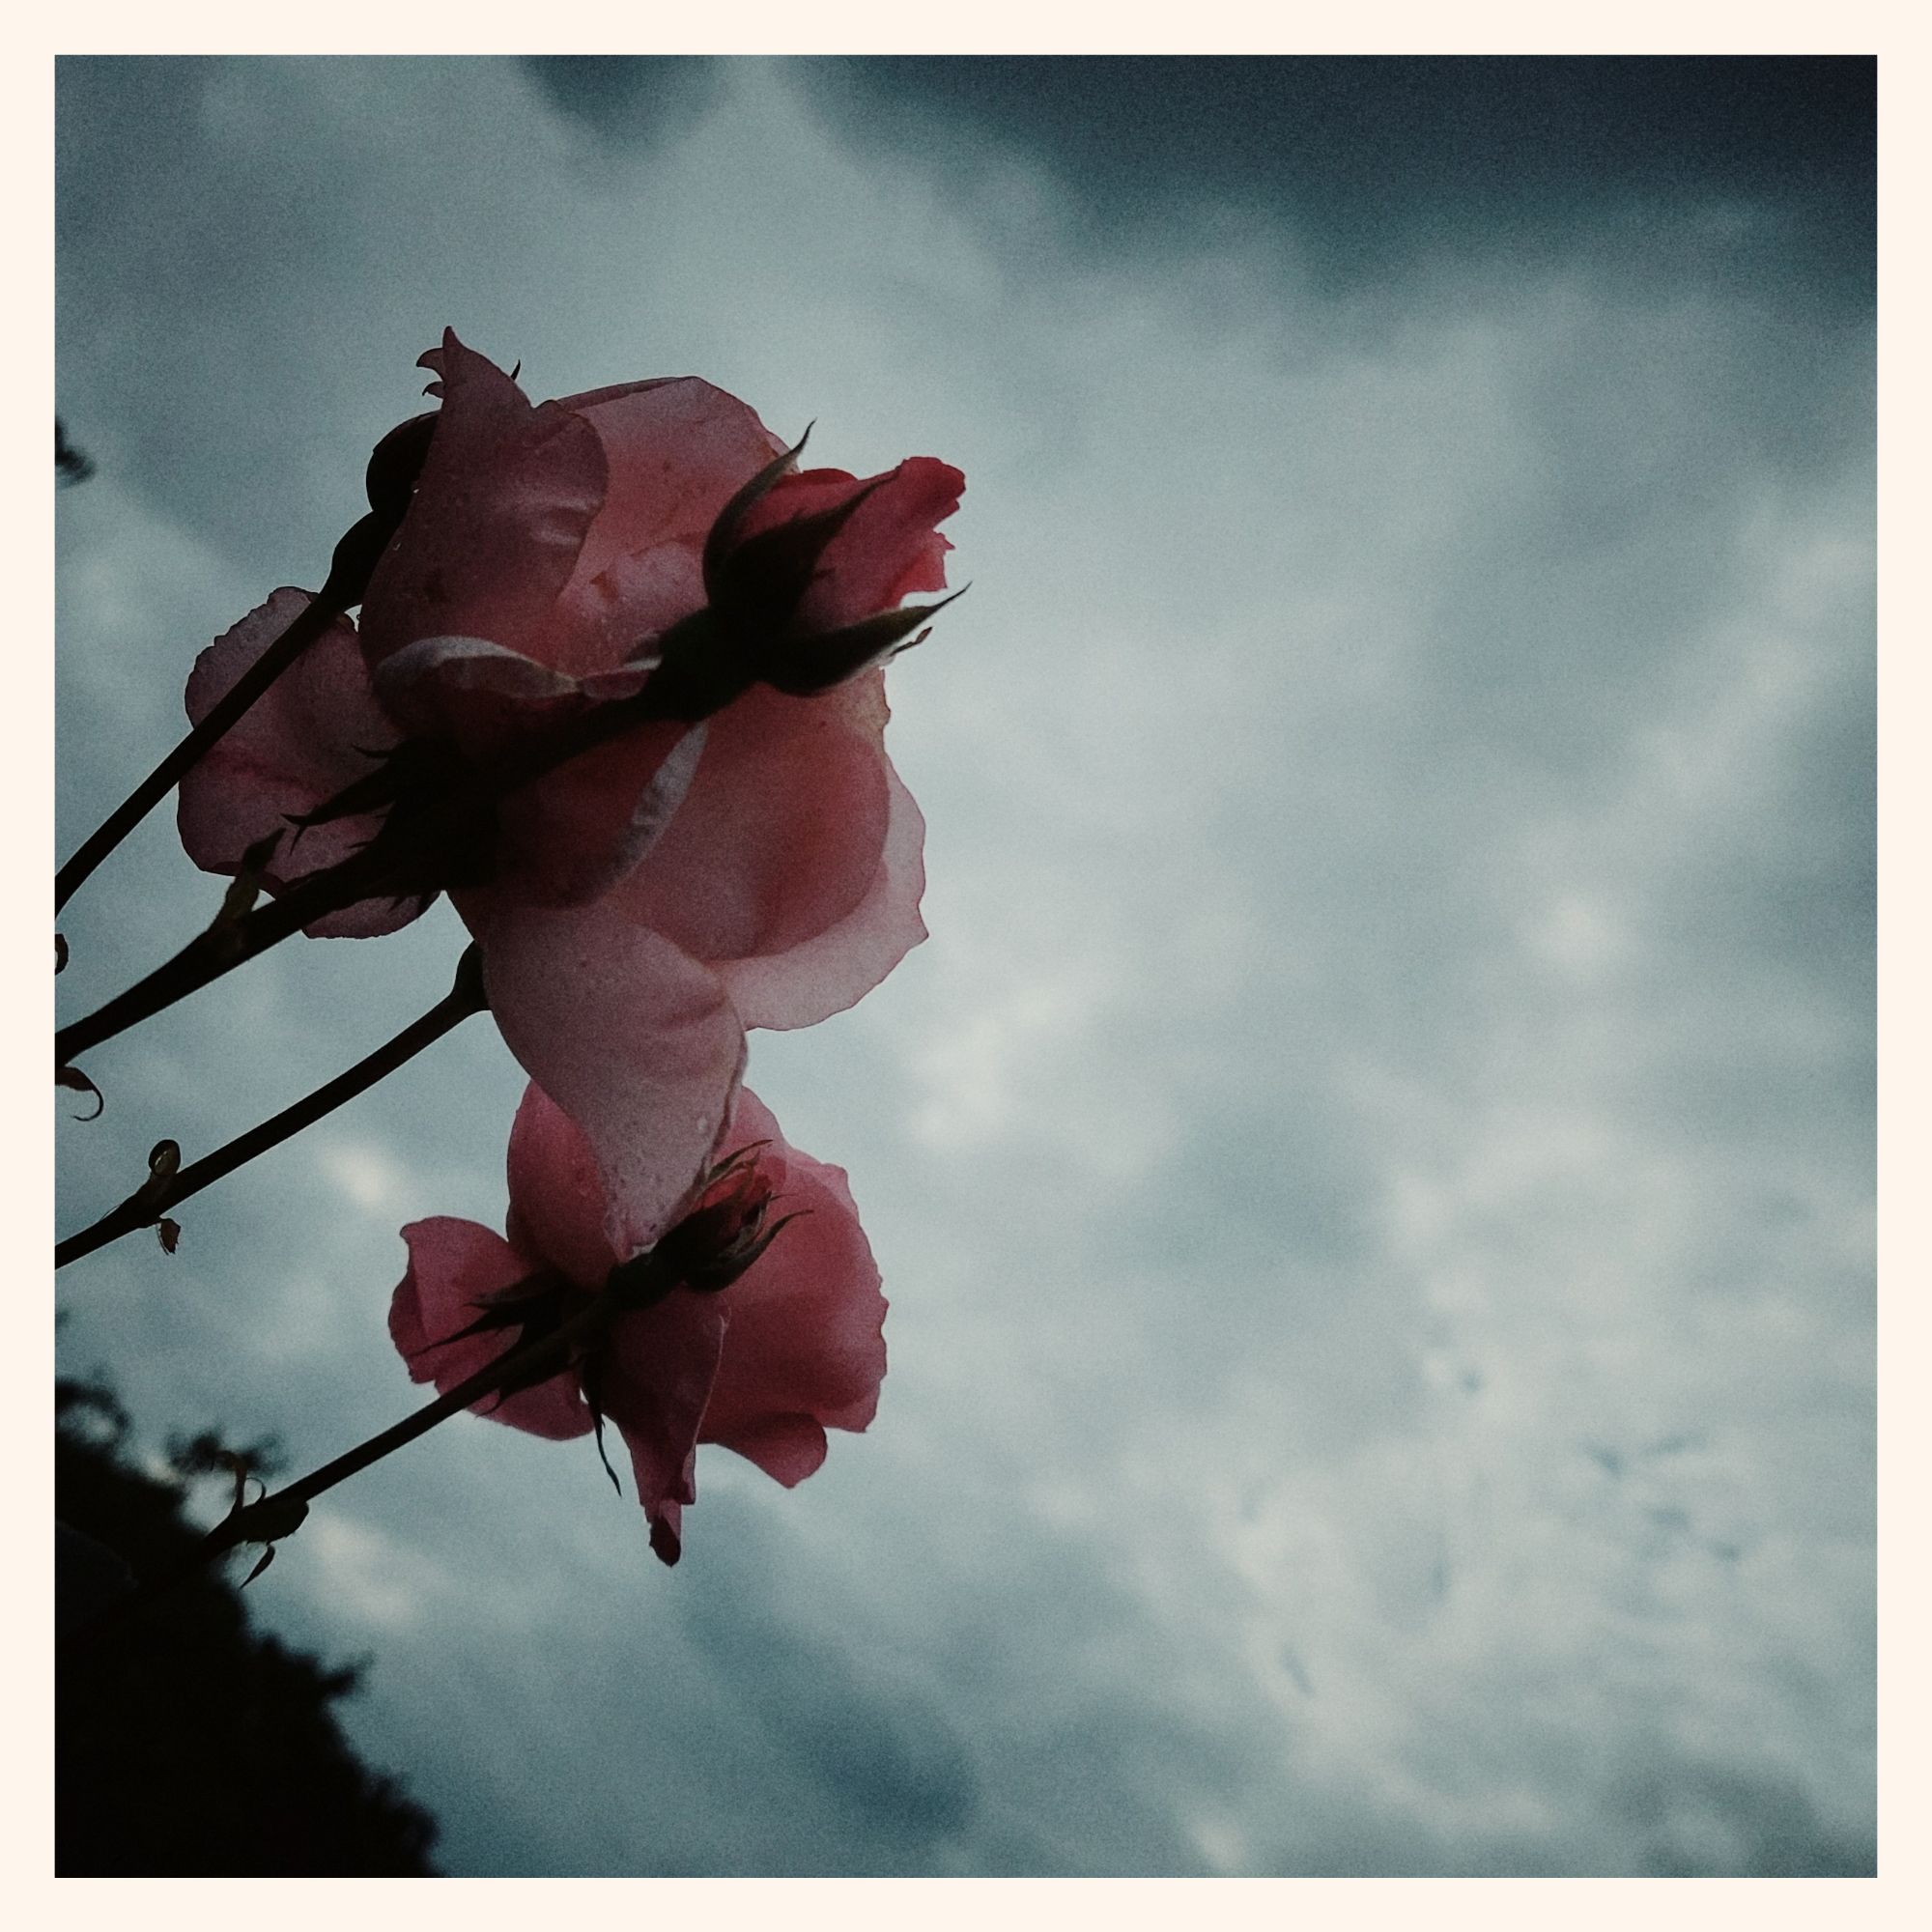 Partially translucent pink roses in front of a cloudy wild sky.